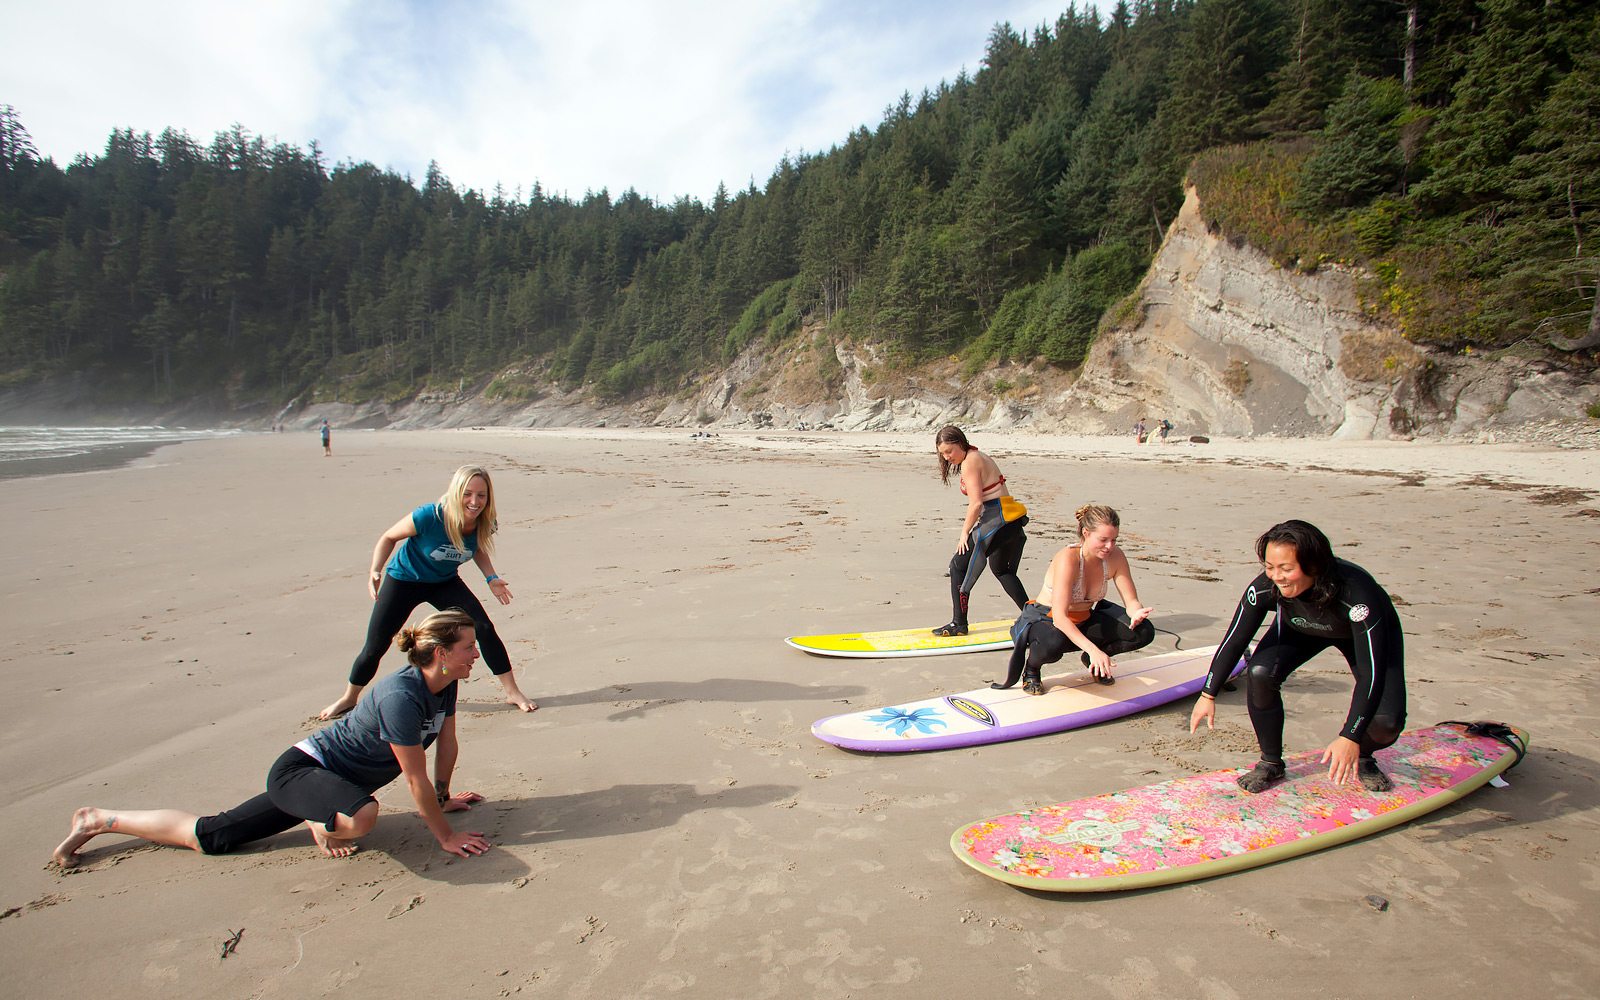 A group of women prepare to learn surfing in Oswald West State Park. Photo by Justin Bailie.